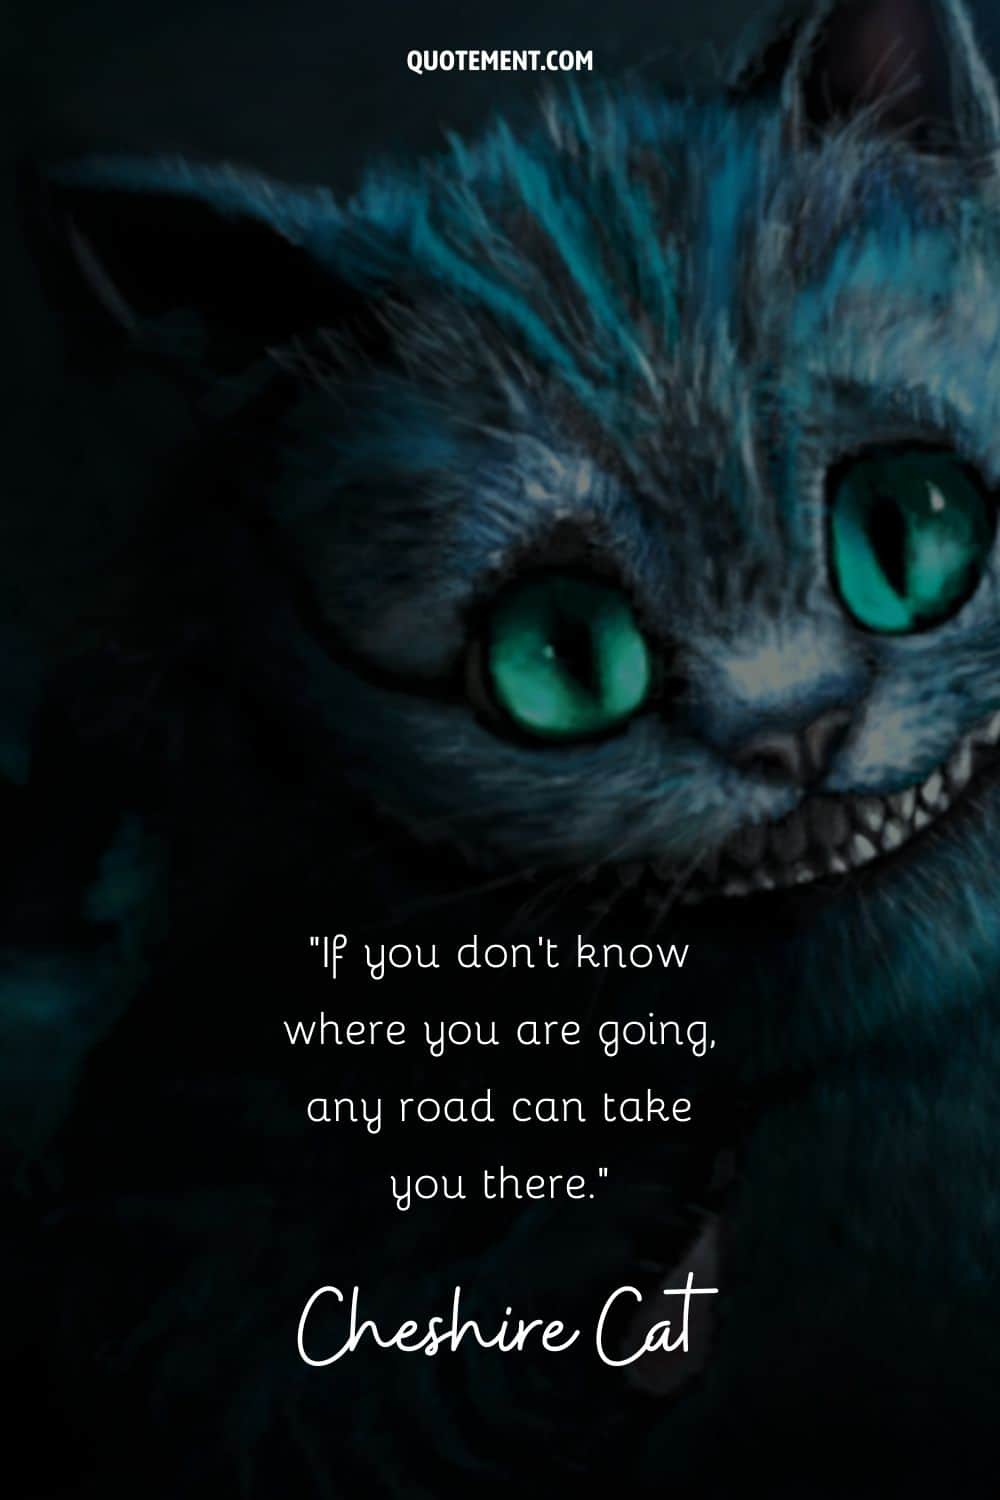 Inspiring quote from the Cheshire Cat and its image in the background, too